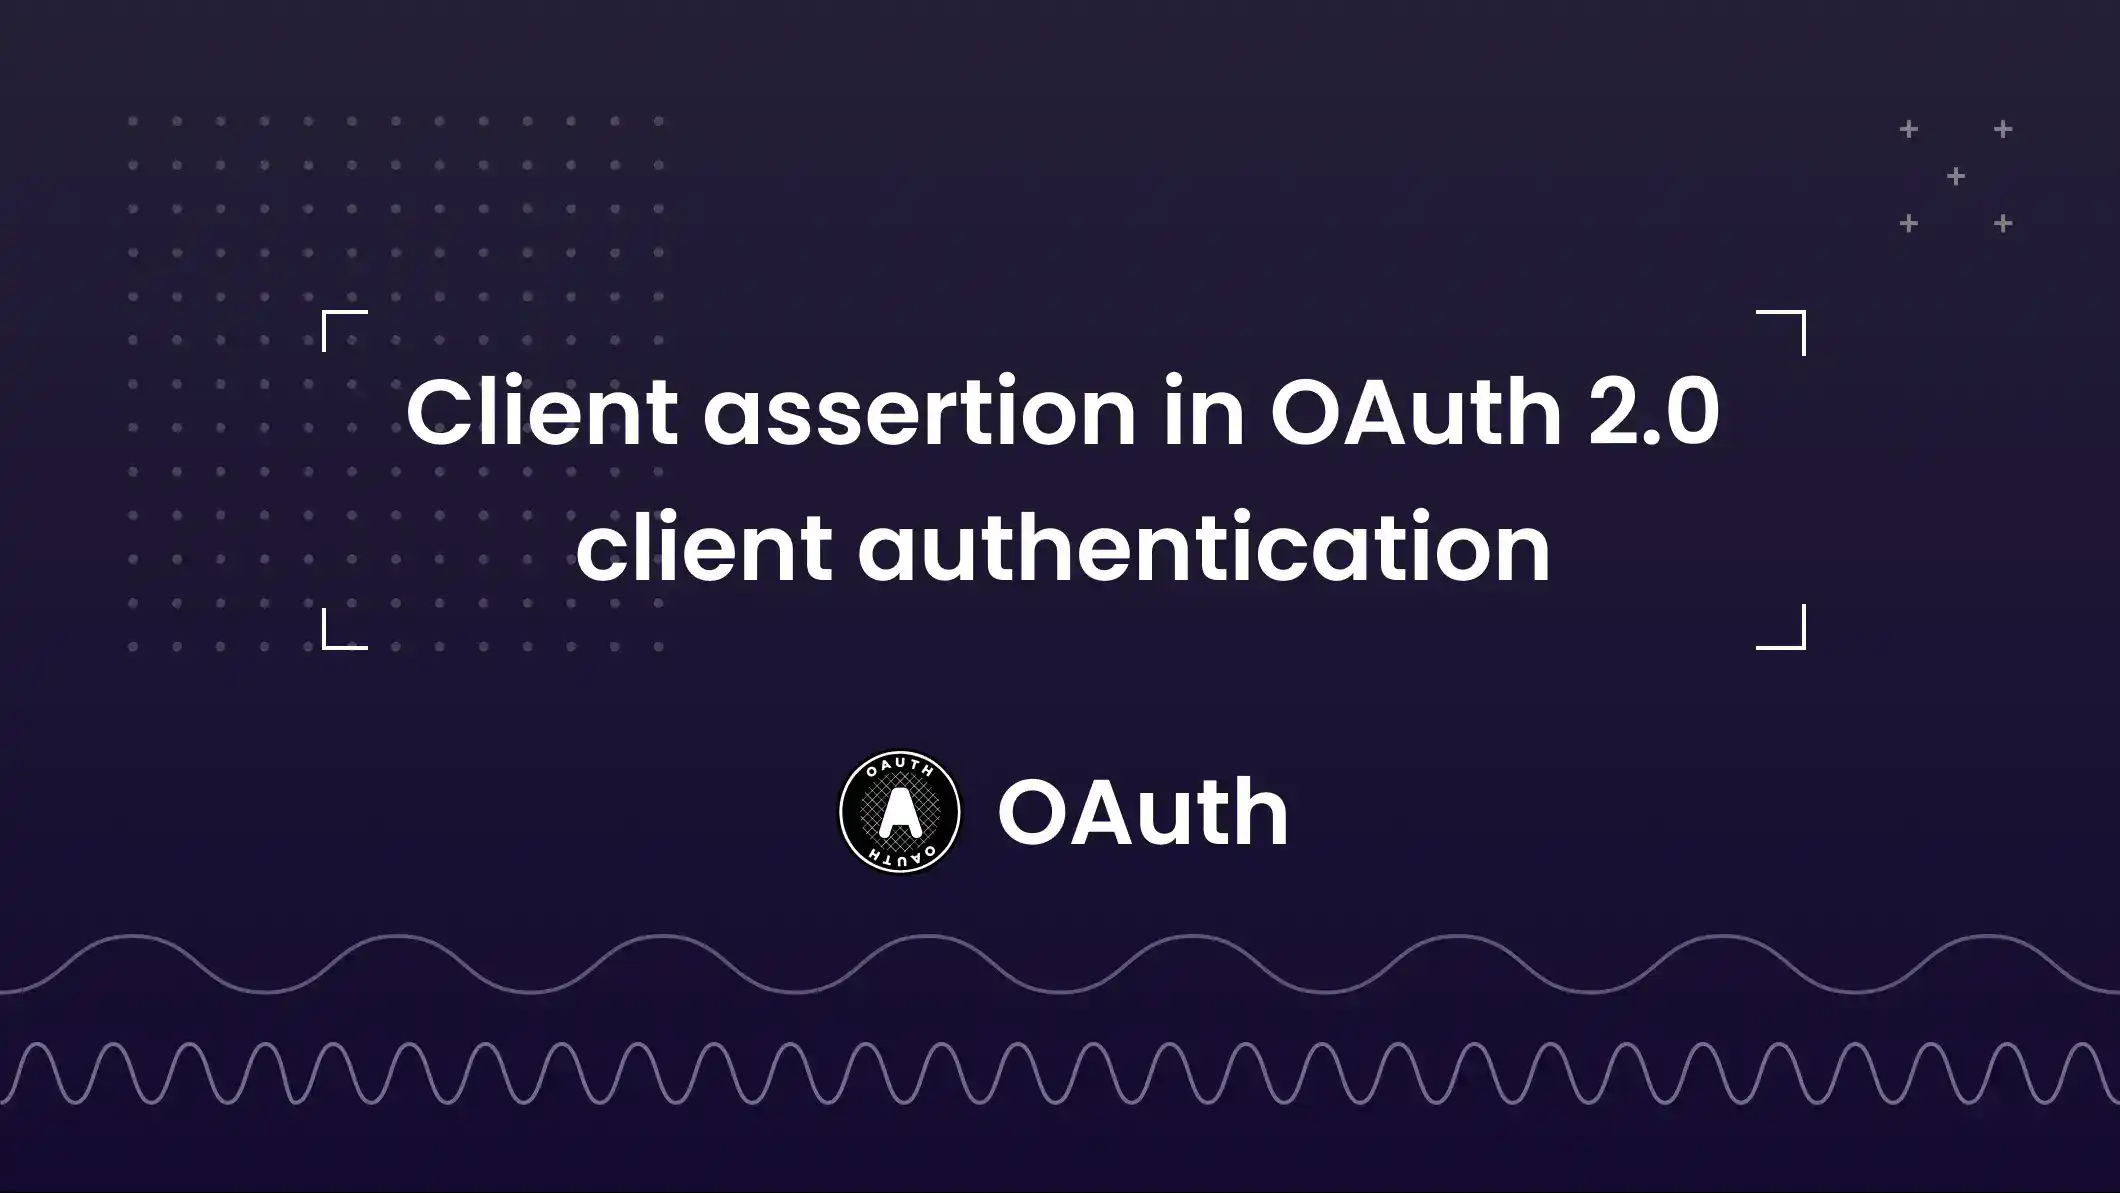 Client assertion in OAuth 2.0 client authentication